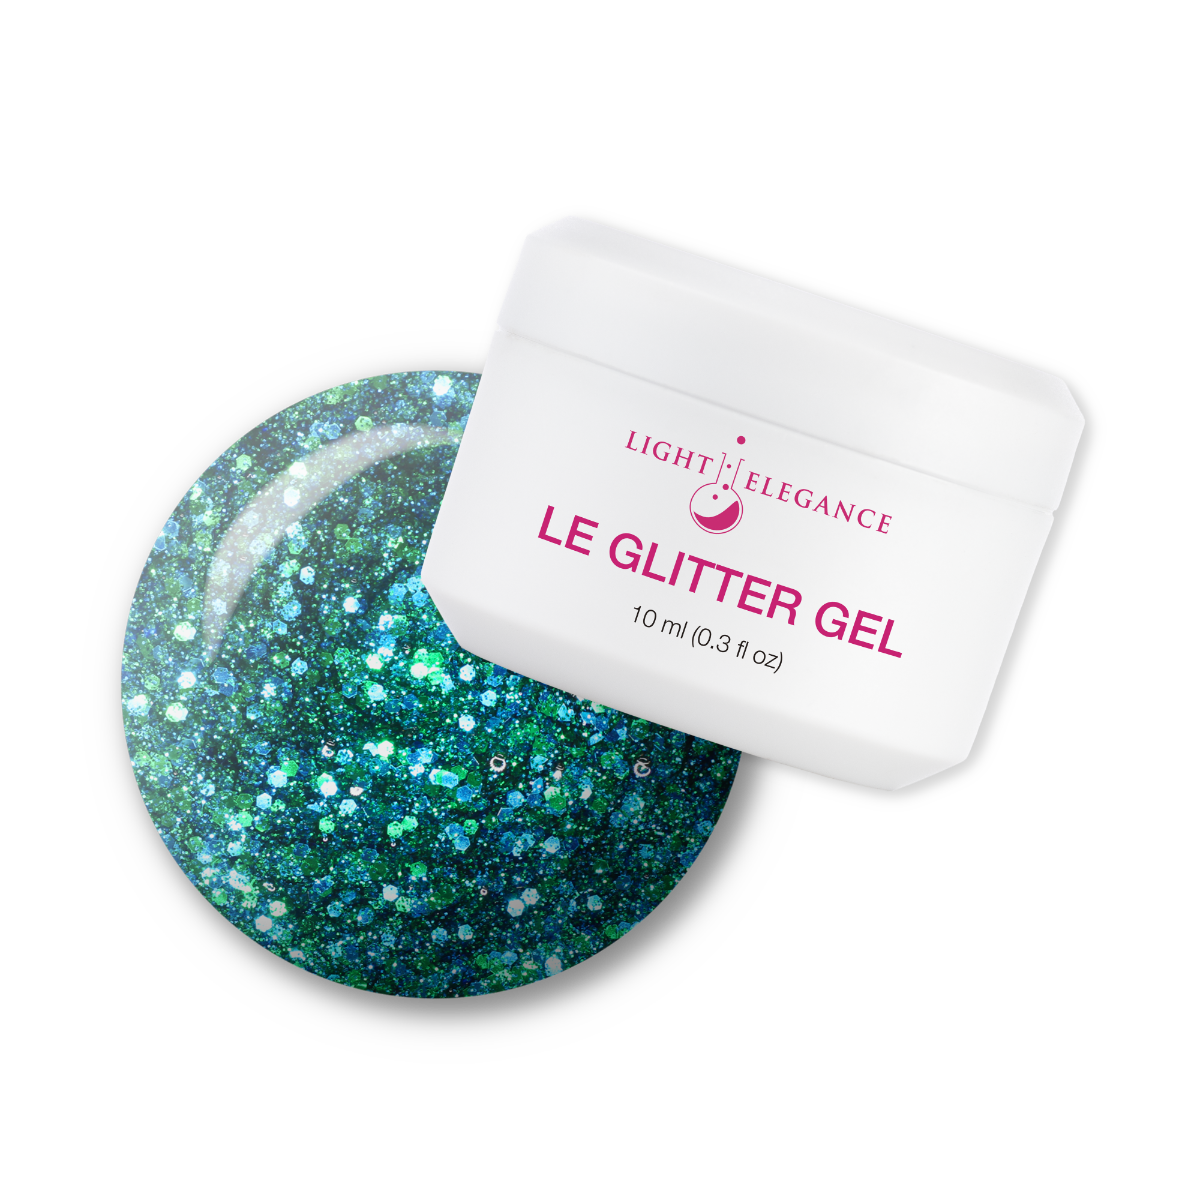 Light Elegance Glitter Gel - Gaudy but Gorgeous :: New Packaging - Creata Beauty - Professional Beauty Products